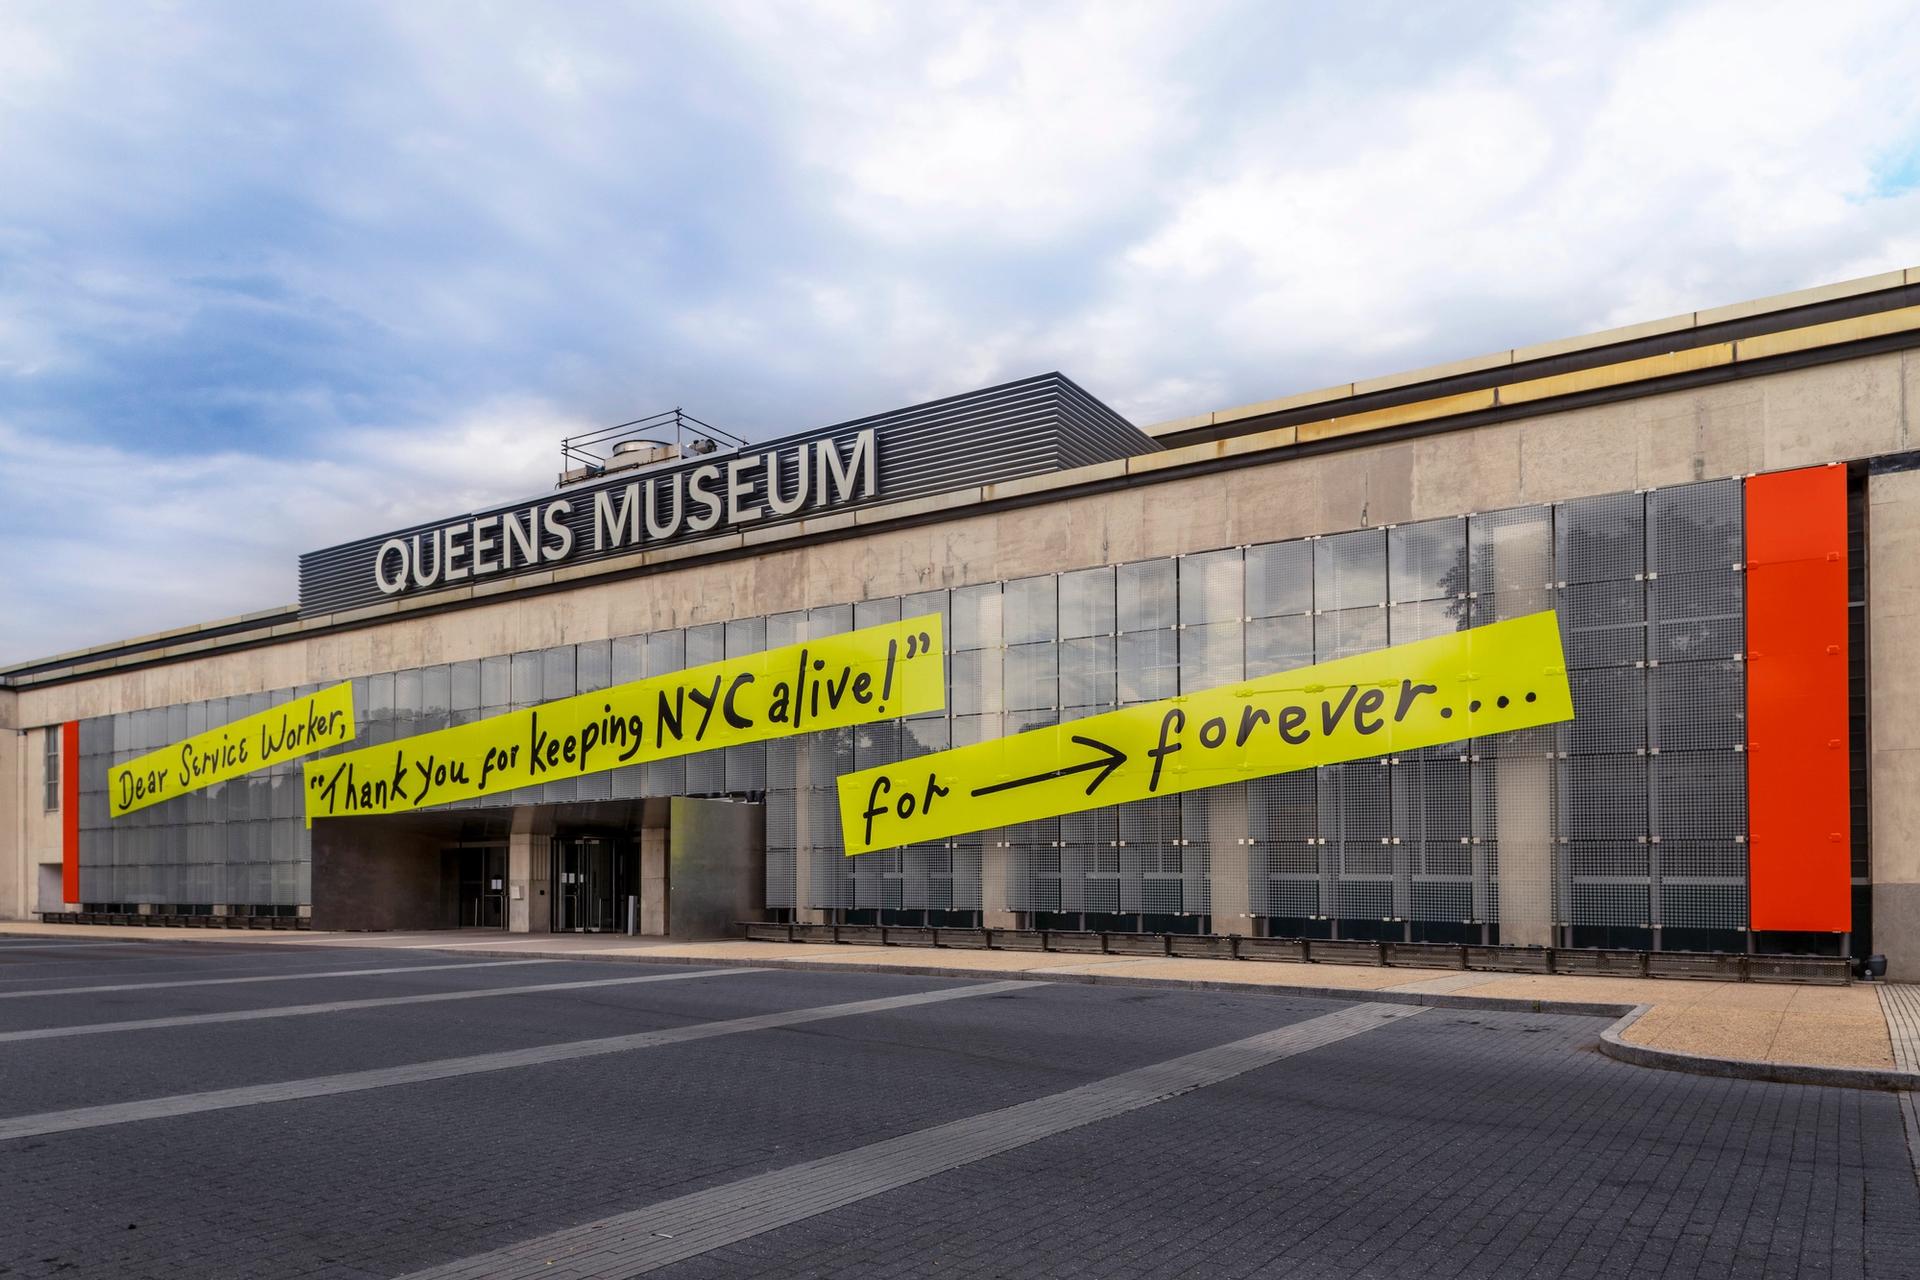 The Queens Museum facade facing Grand Central Parkway featuring Mierle Laderman Ukeles, For ⟶ Forever (2020). © Mierle Laderman Ukeles. Photo: Hai Zhang.